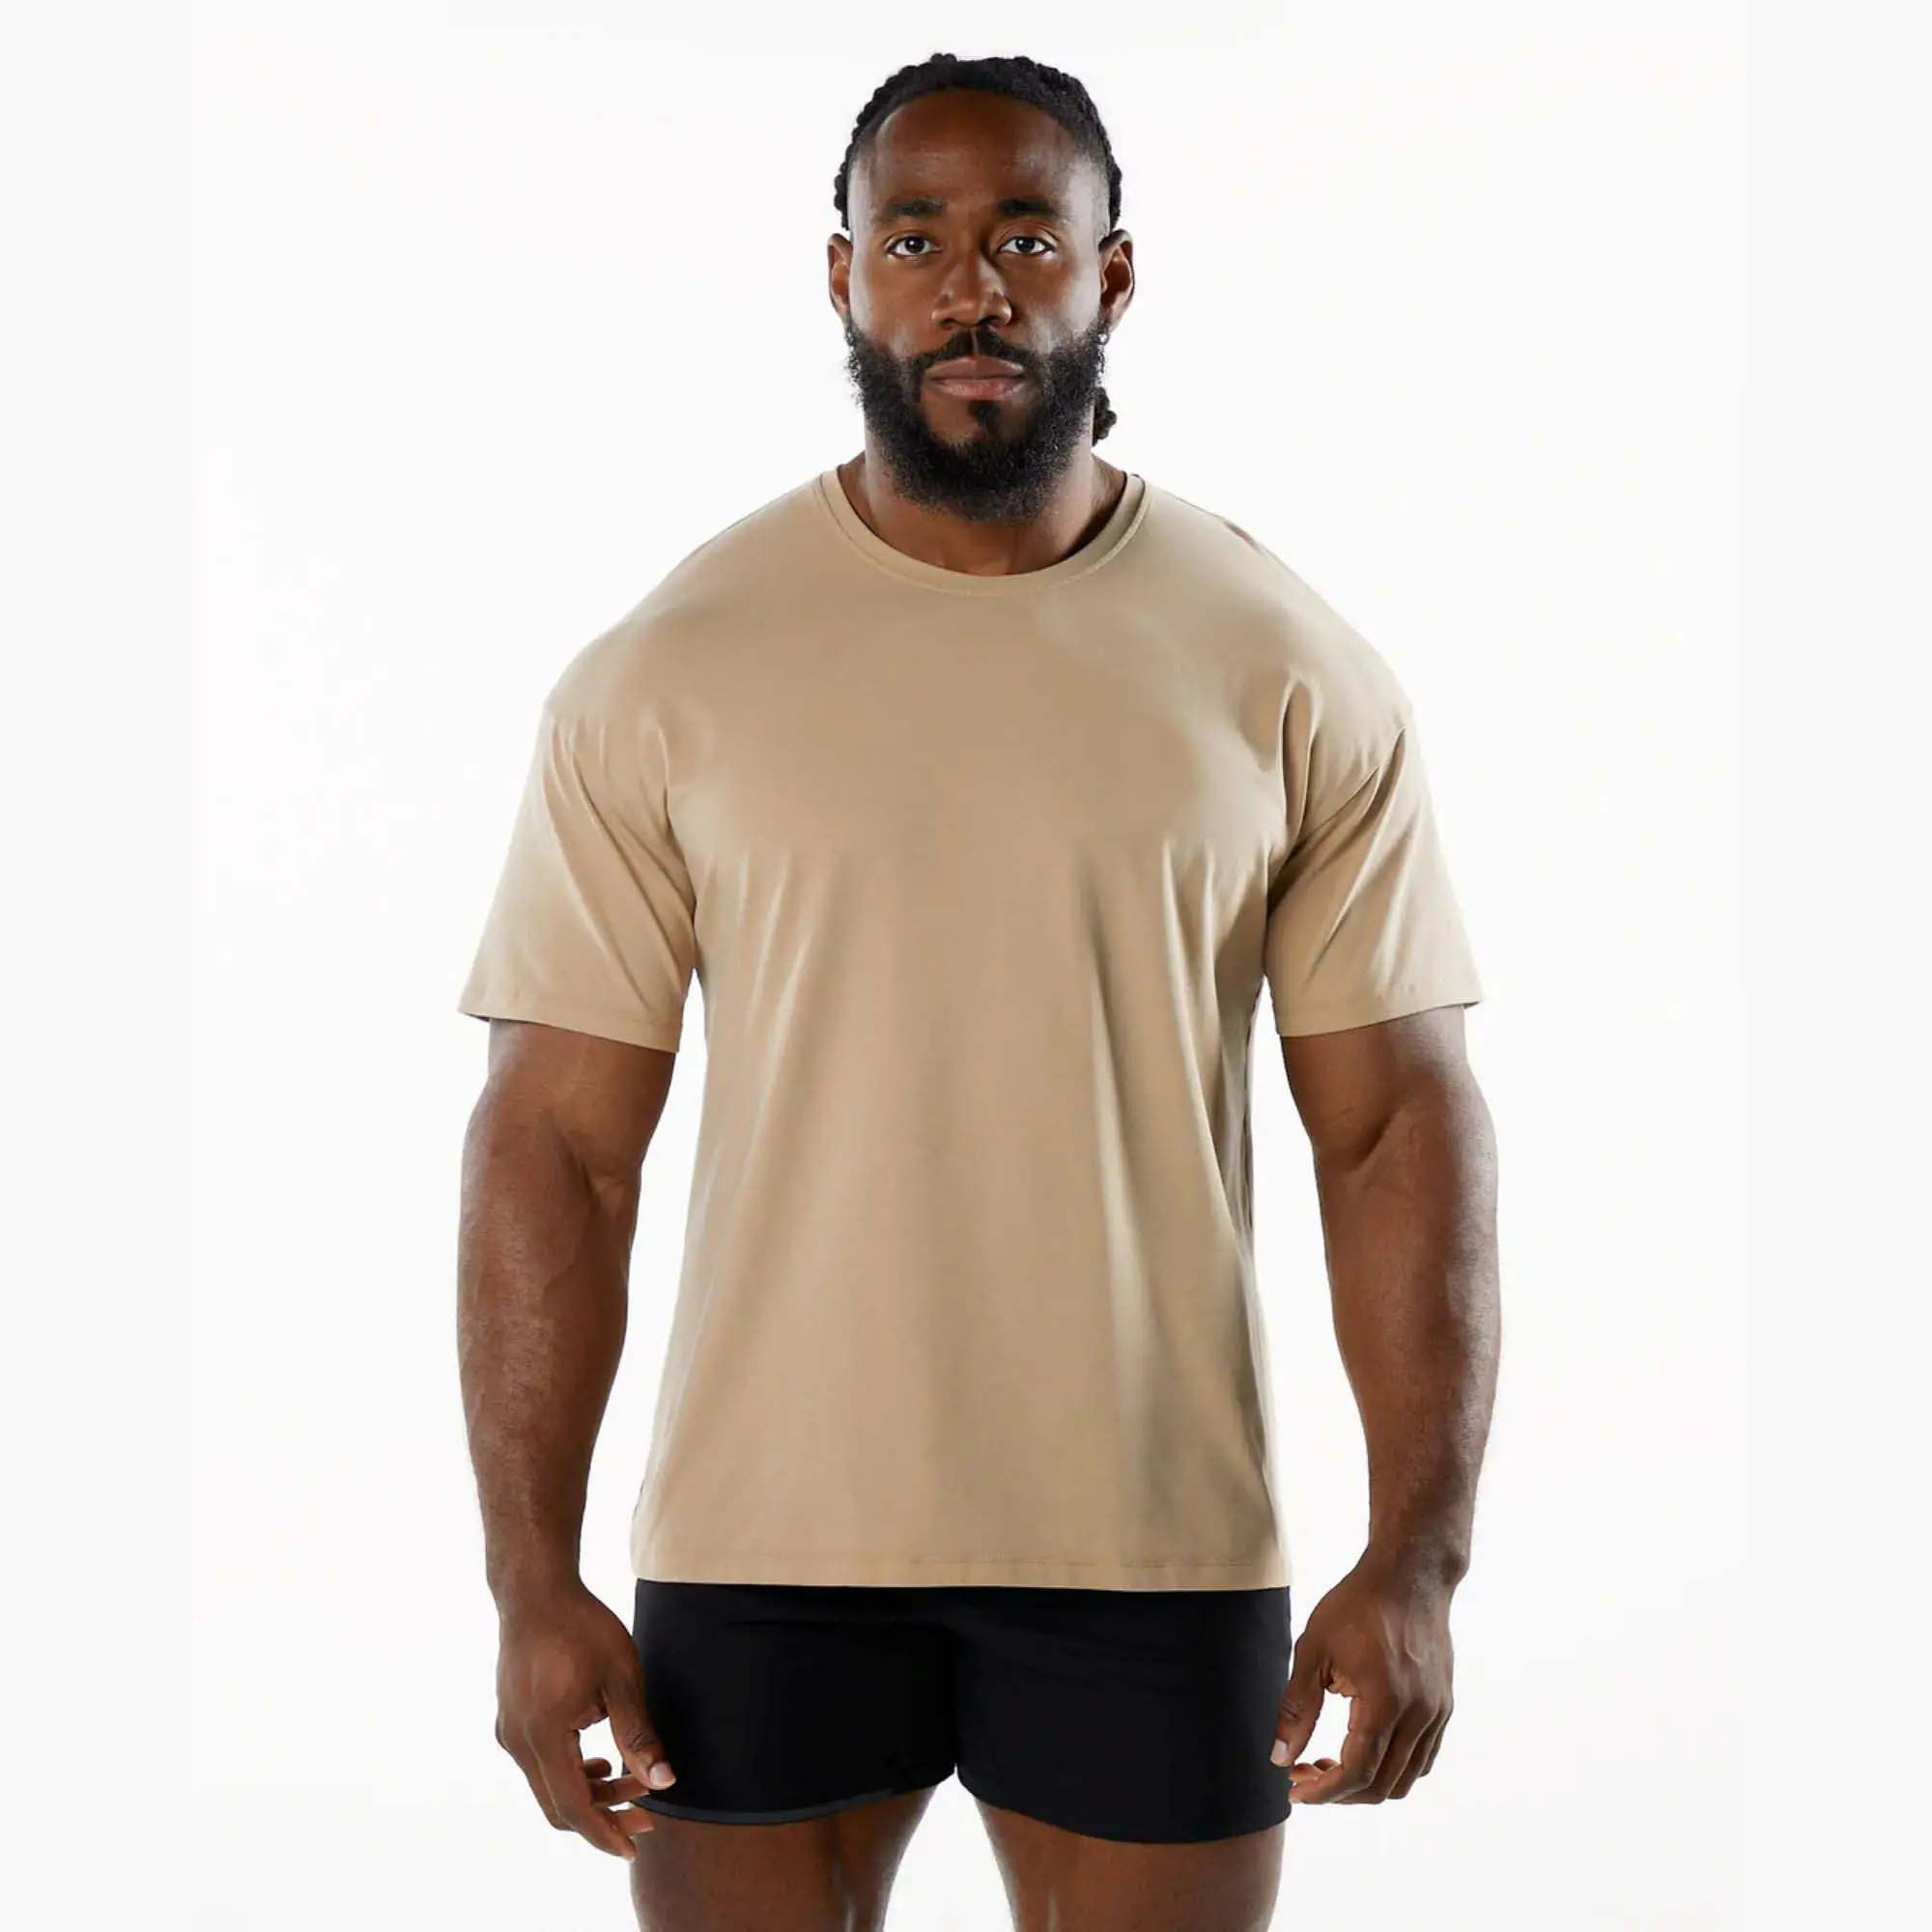 94% Cotton 6% Spandex Signature Performance Fitted Raglan Cut Short Sleeves Crew Neck Taupe Mens Drop Shoulder T-Shirt